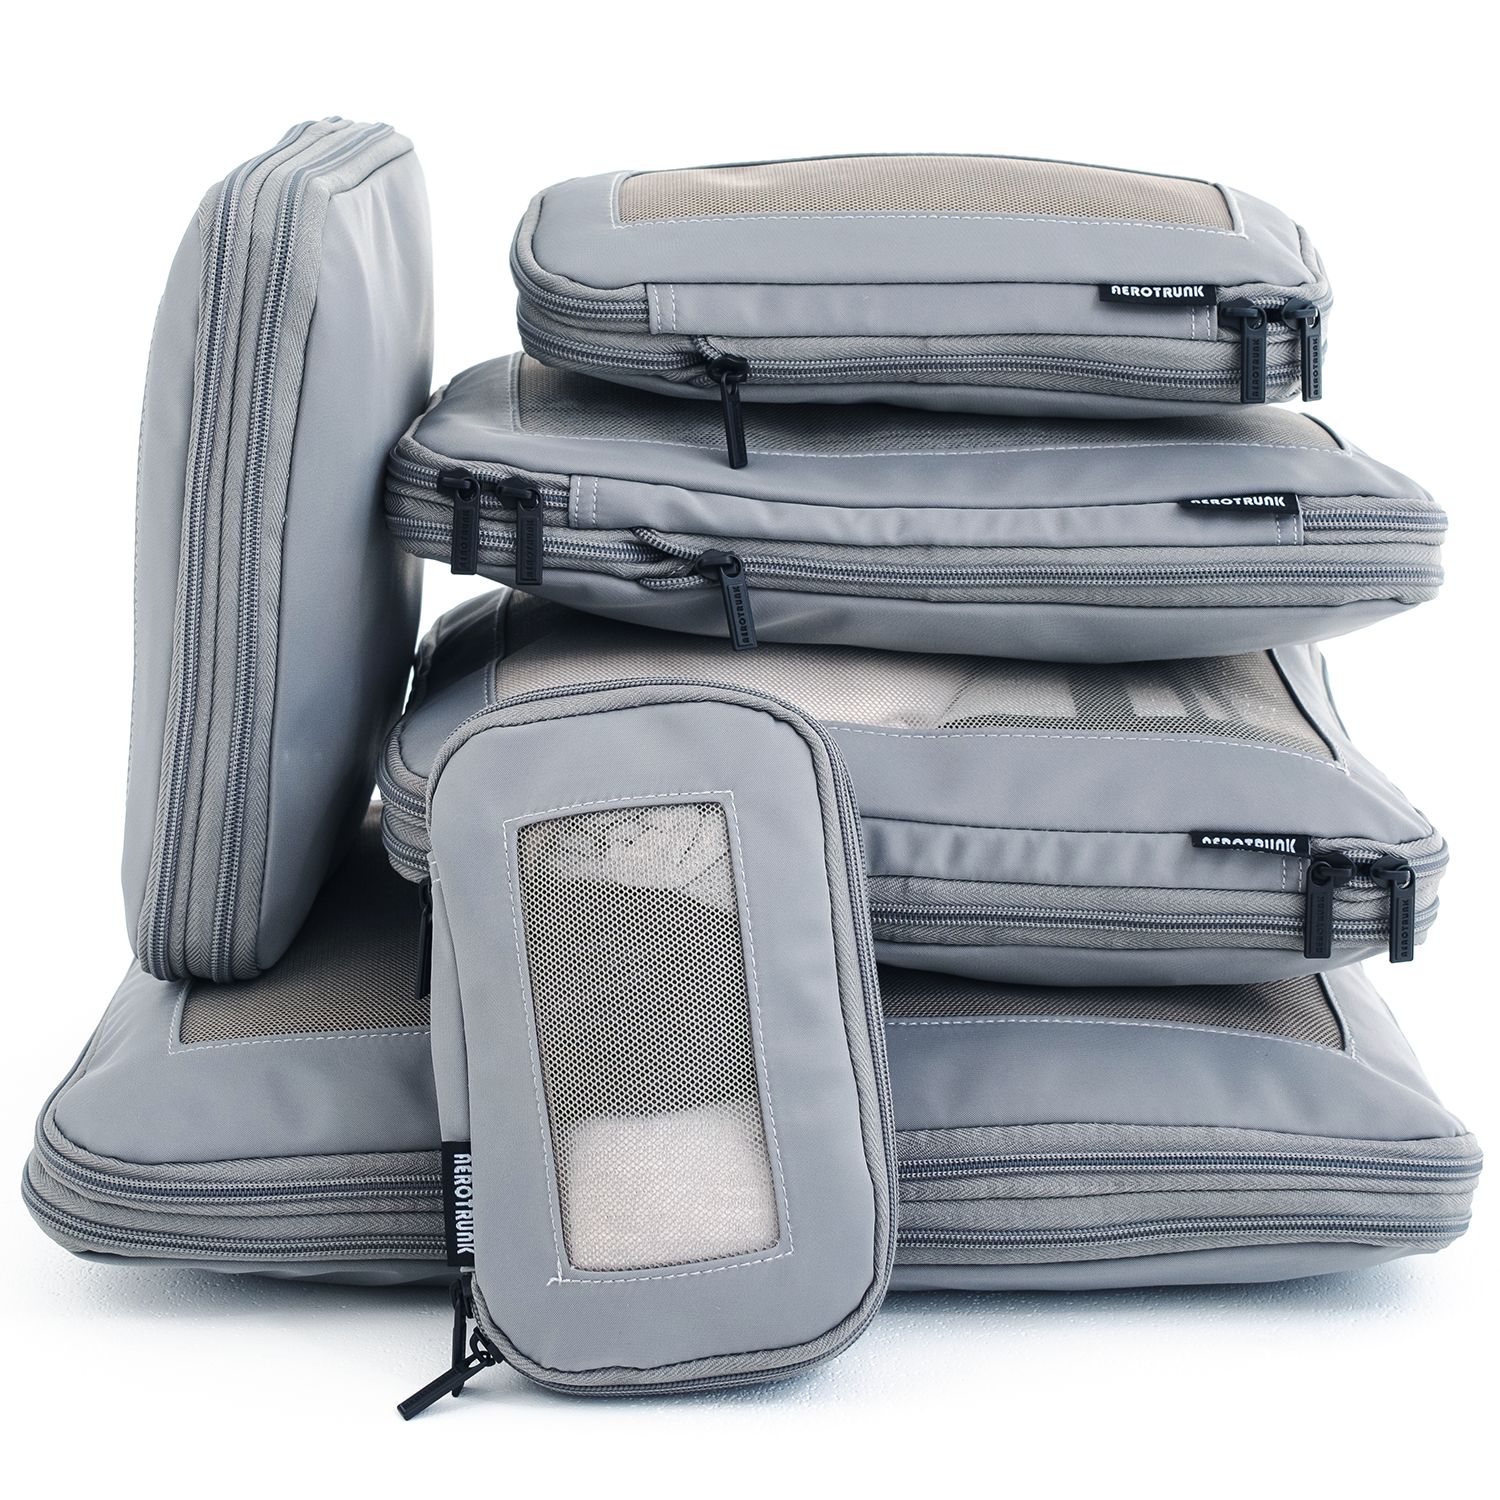 Shop Compression Packing Cubes for Travel